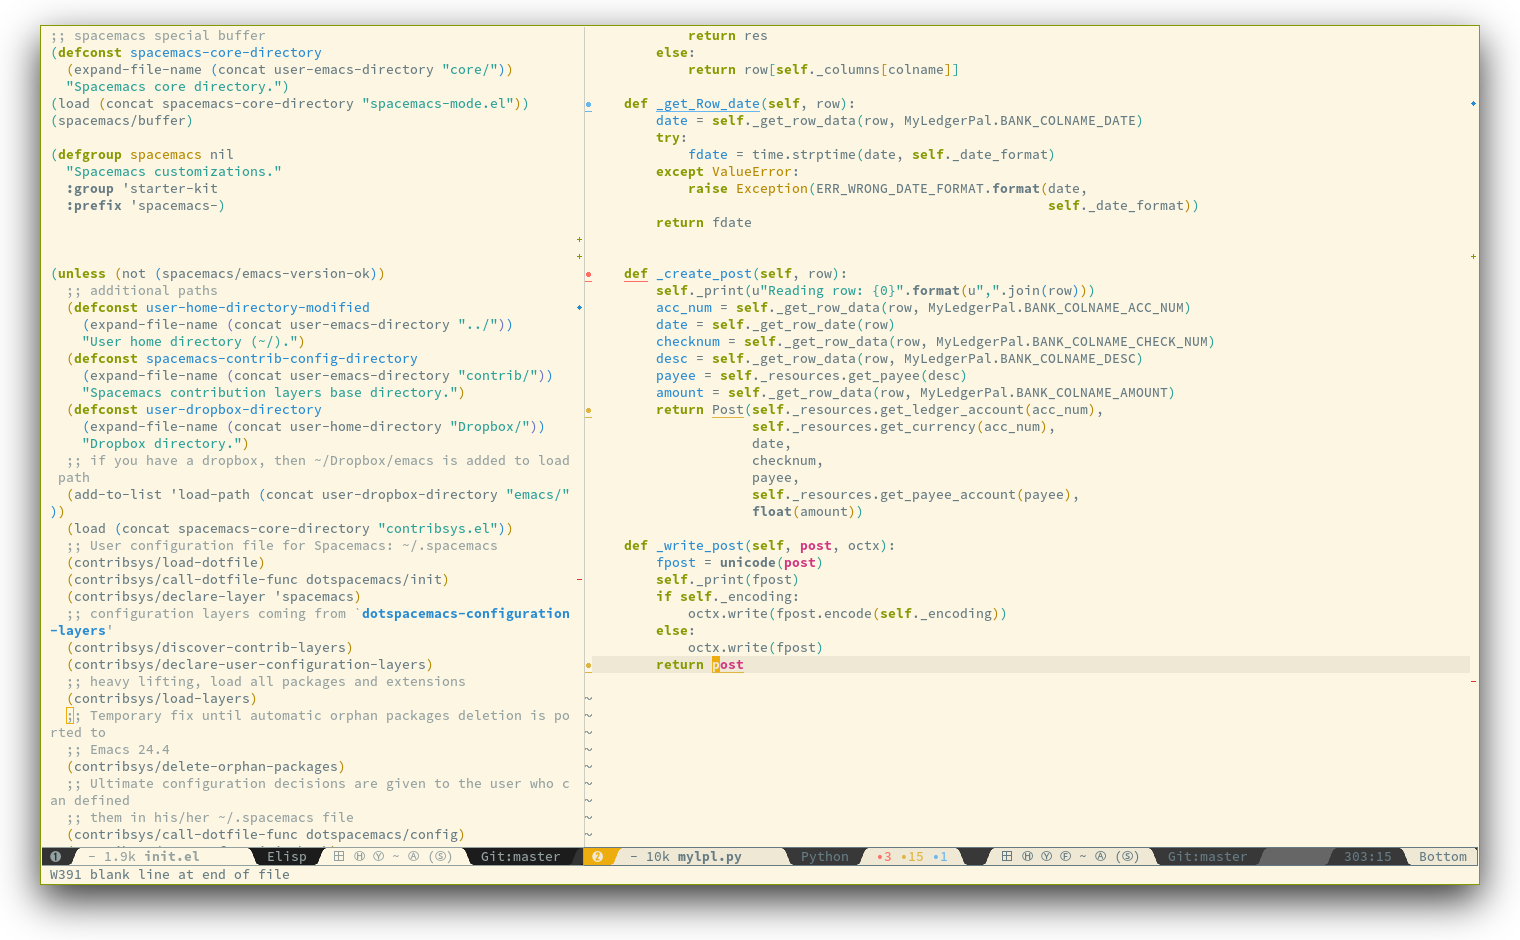 /TakeV/spacemacs/media/commit/f53620a1c8ad72c51d40942c169a3afe779f5088/doc/img/spacemacs-python.png